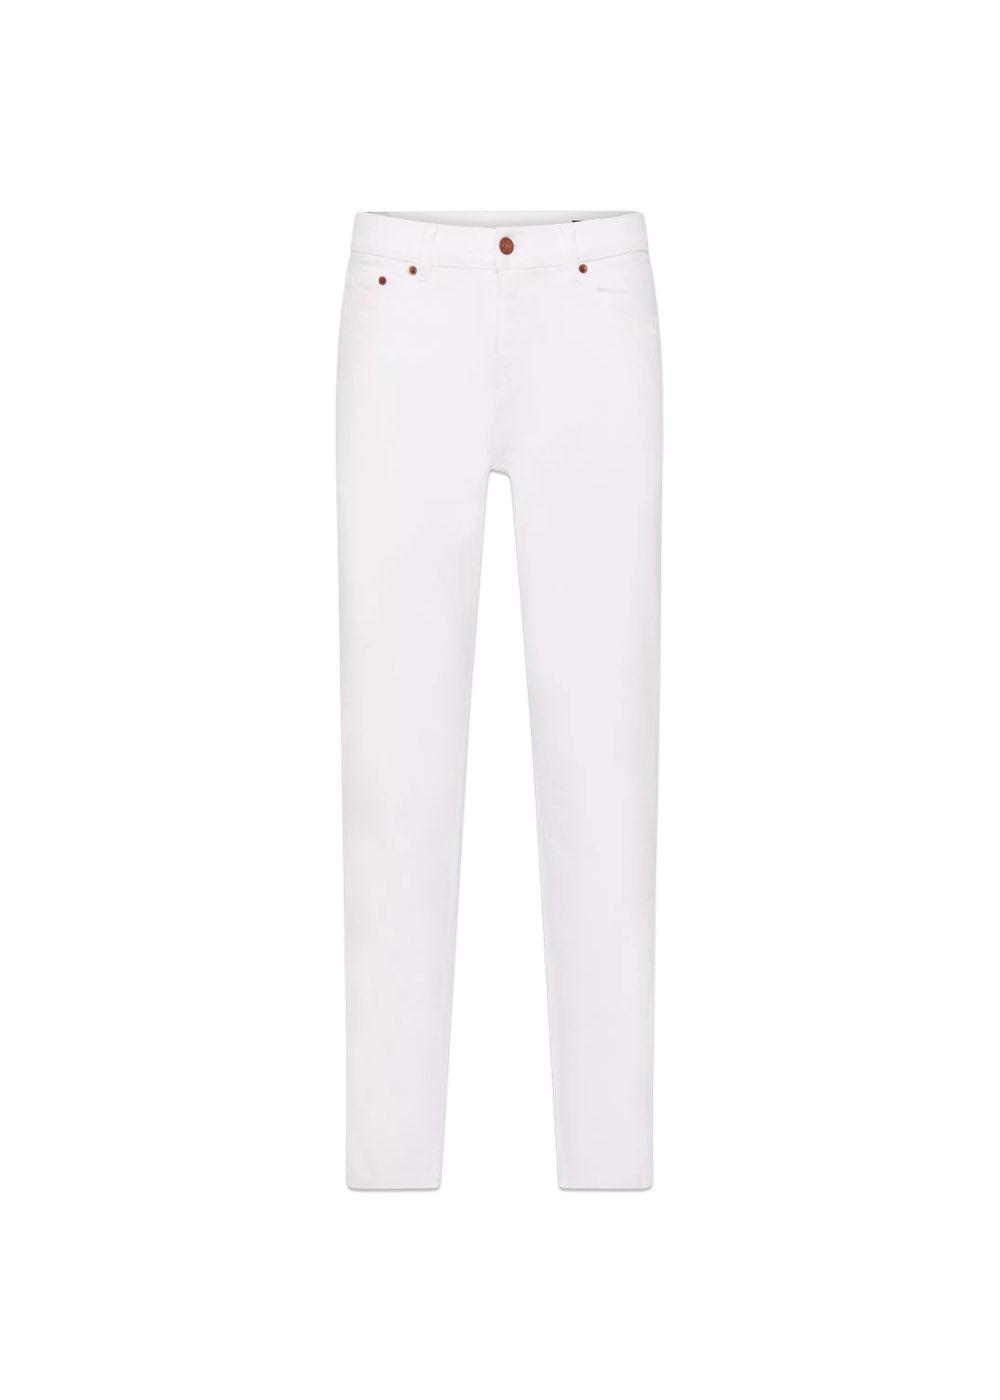 Oscar Jacobsons Karl Trousers - Snow White. Køb jeans her.